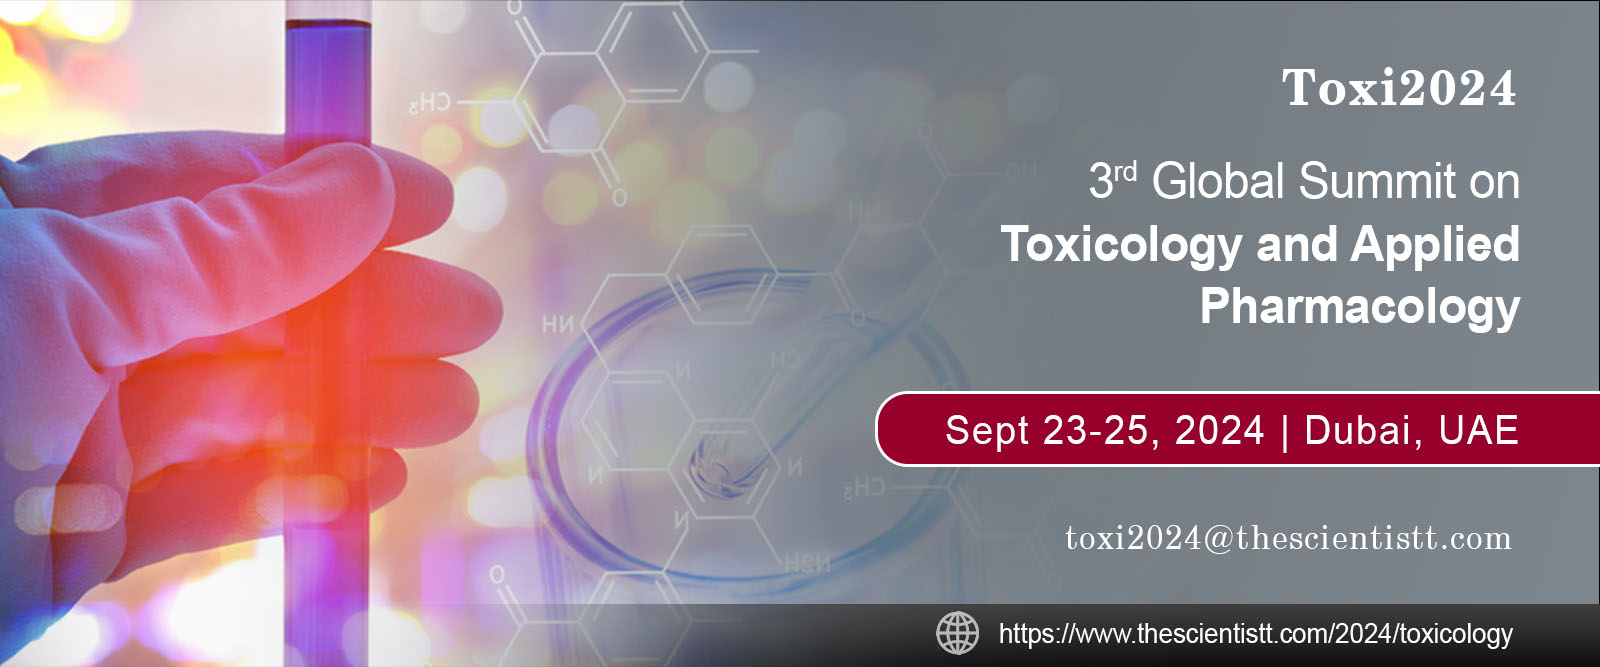 3rd Global Summit and Expo on Toxicology and Applied Pharmacology (TOXI2024)